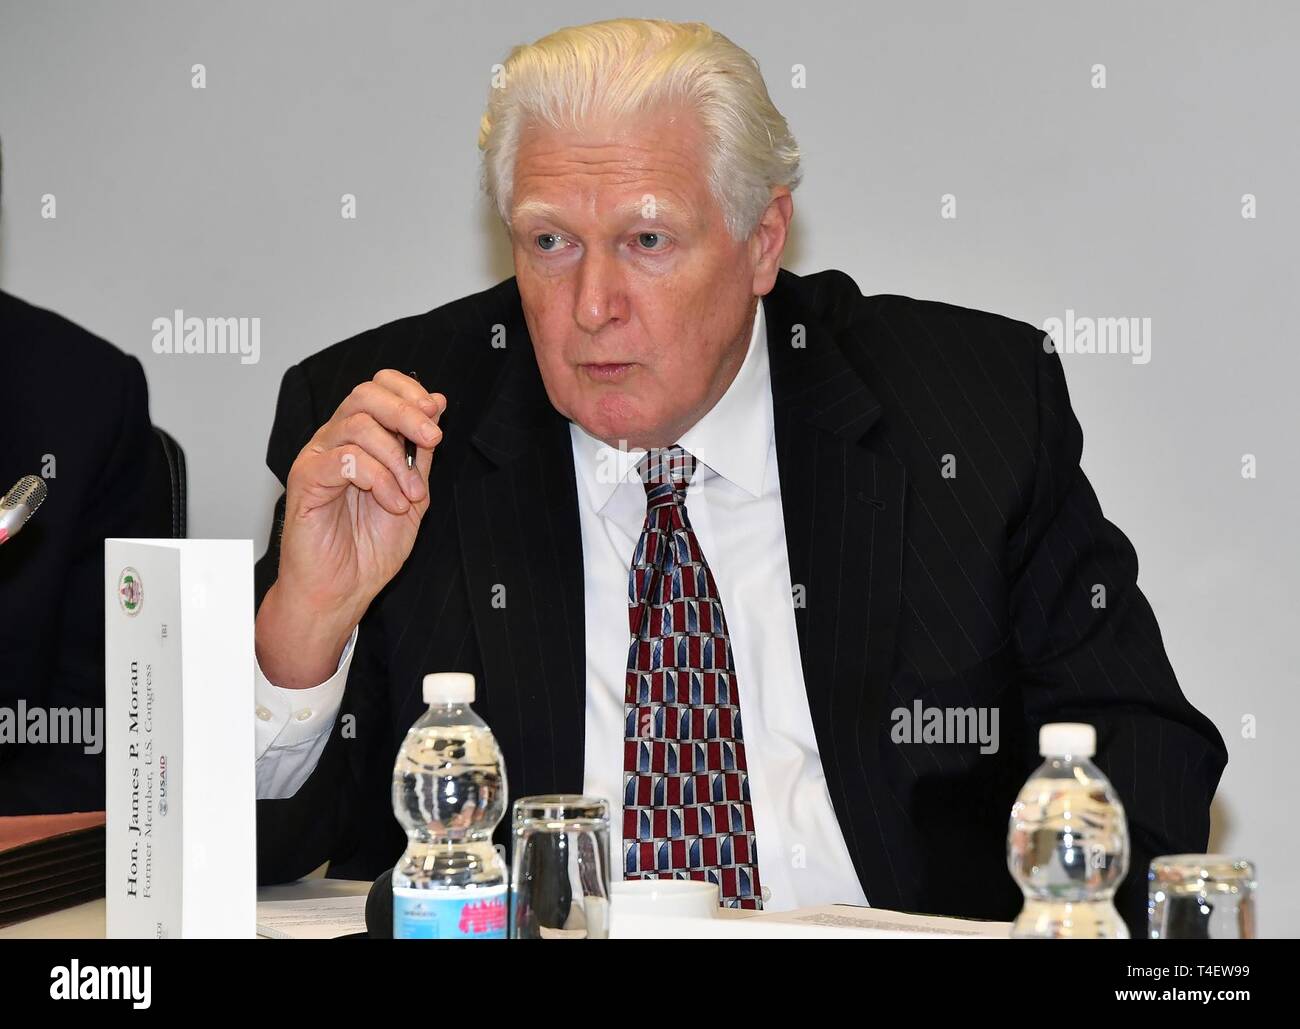 GARMISCH-PARTENKIRCHEN, Germany – Former Congressman Jim Moran talks about conducting effective bipartisan oversight on security sector during a parliamentary exchange focused on the oversight of security sector institutions and current issues to about 20 politicians from the Republic of Albania, Republic of Georgia, Kyrgyz Republic and Republic of North Macedonia March 19 at the Marshall Center. (DOD Stock Photo